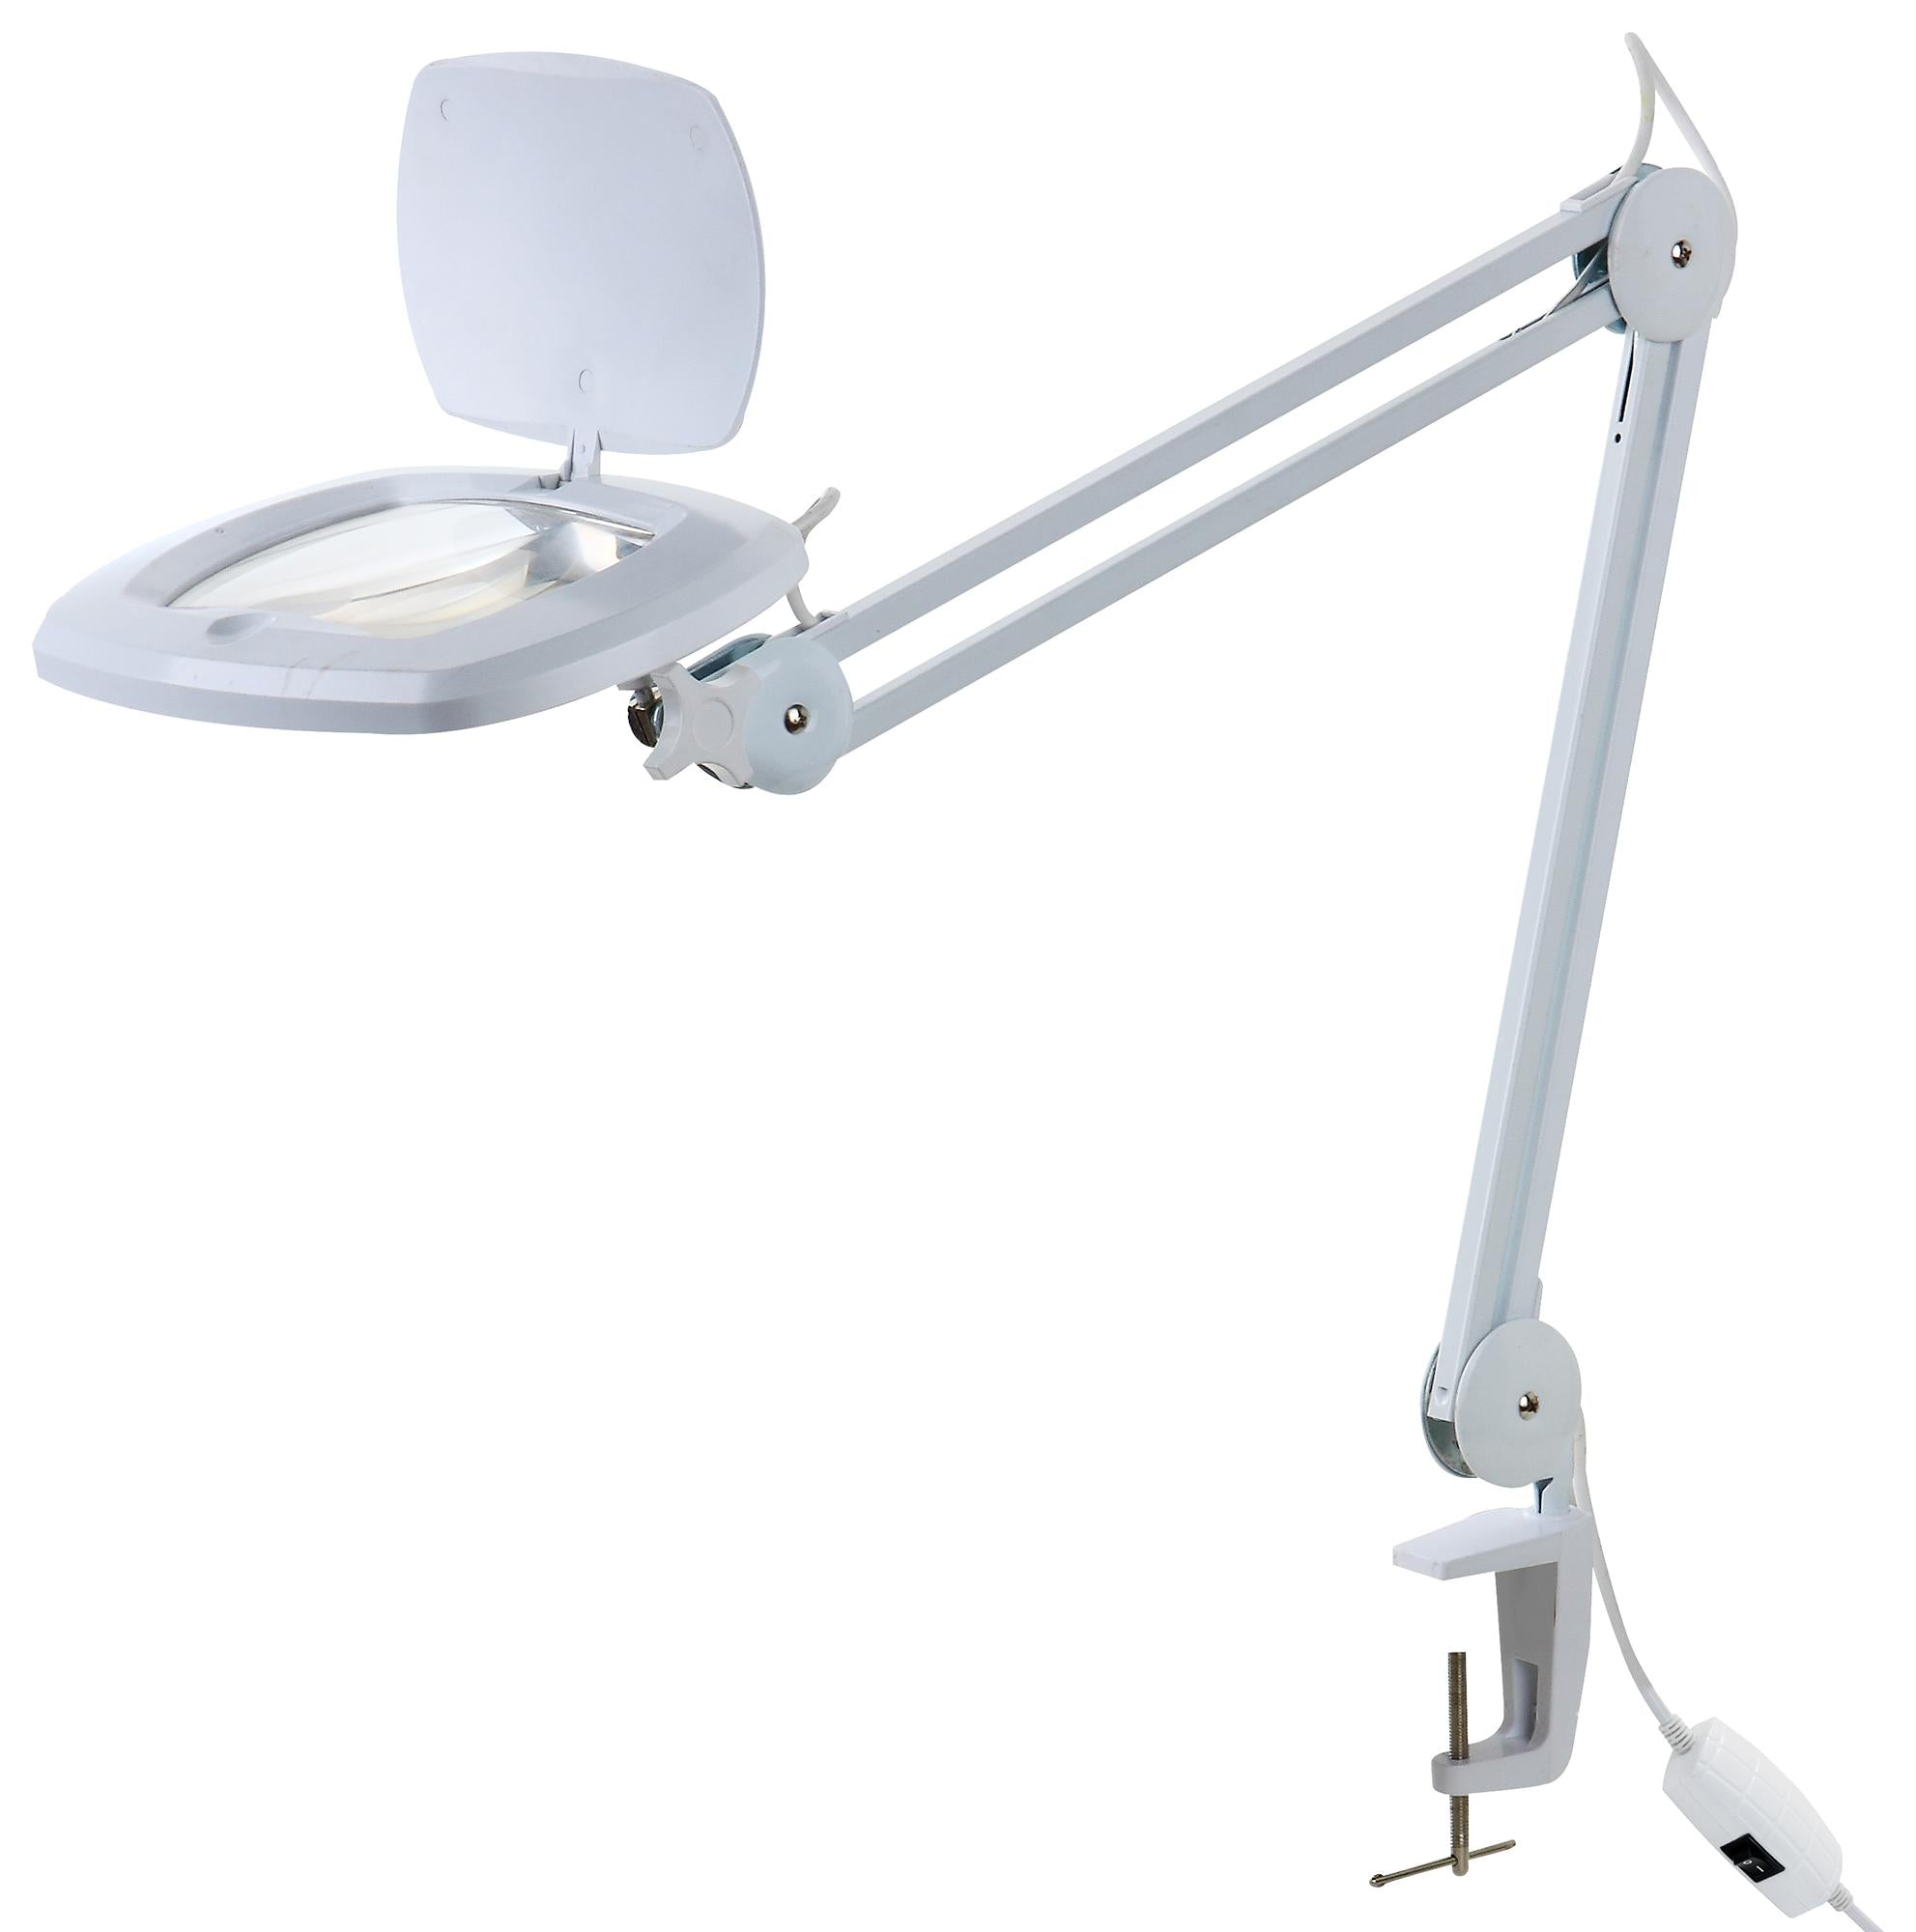 DT000092 LED MAGNIFYING LAMP, 3 DIOPTRE, 15W DURATOOL